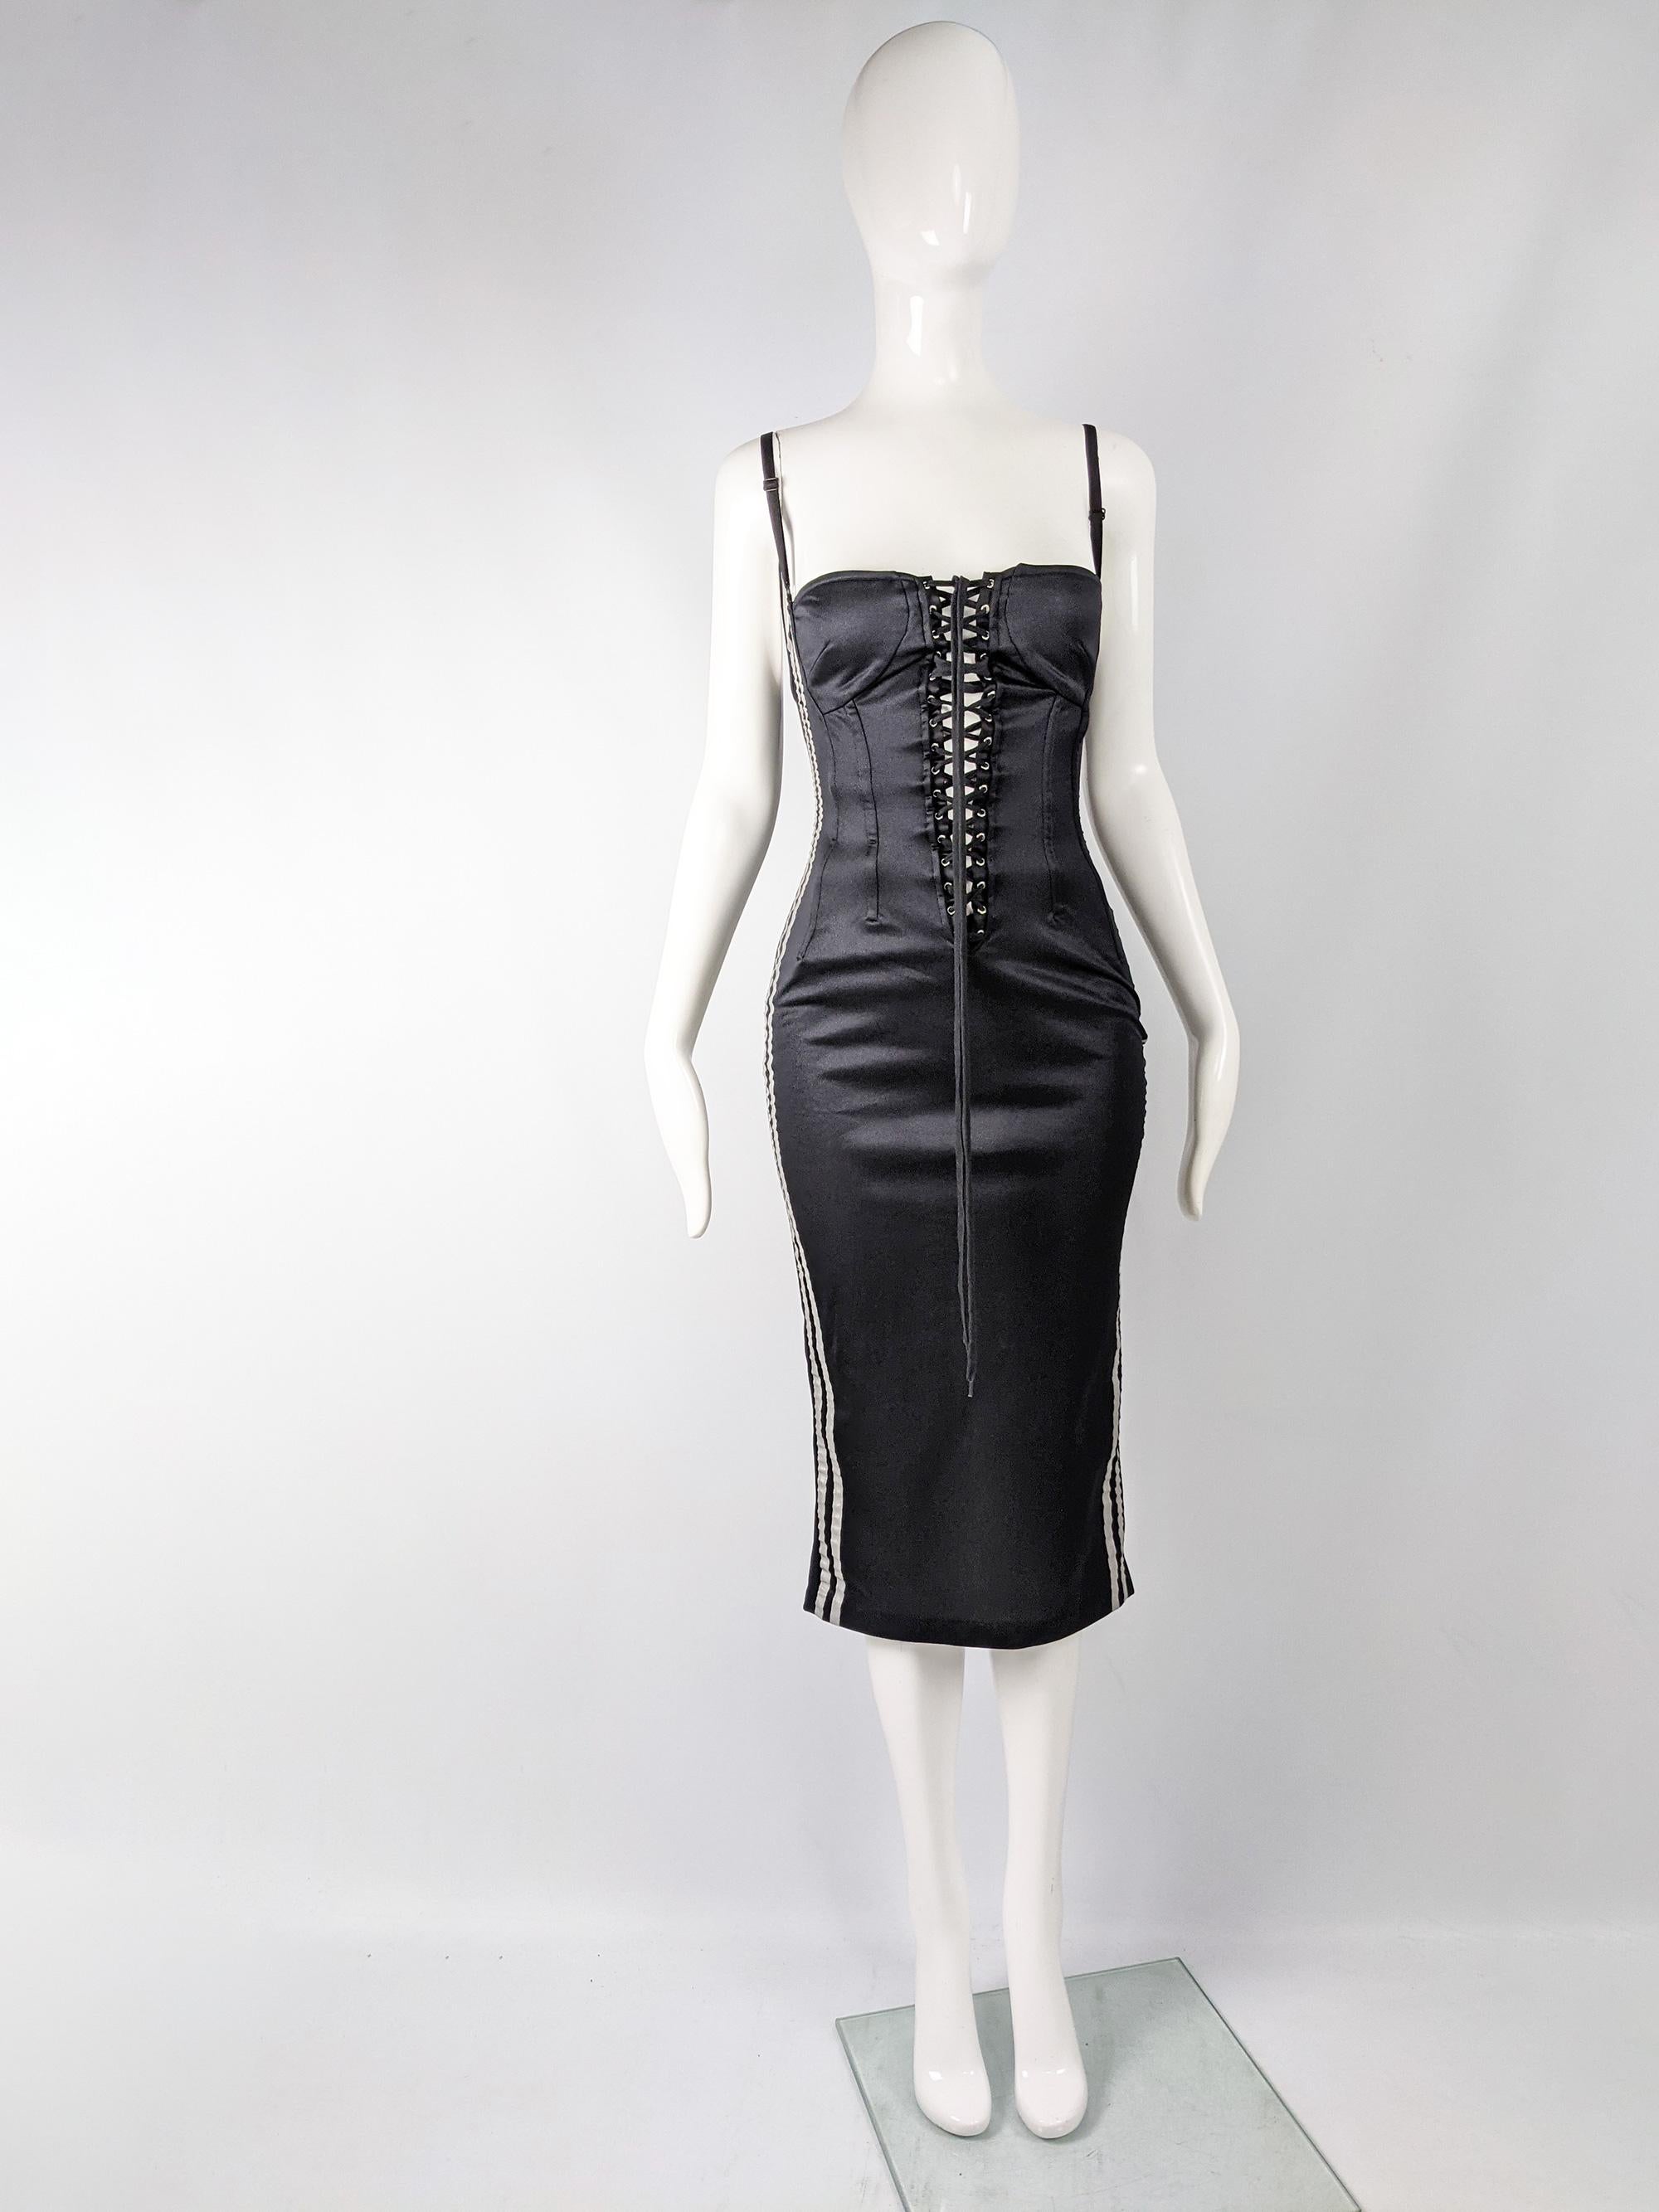 An incredible vintage Dolce & Gabbana D&G dress from the late 90s, made in Italy from a black satin. it has a boned, corset style bodice with lacing at the plunging front and back which reveals your skin underneath for a look that has loads of sex